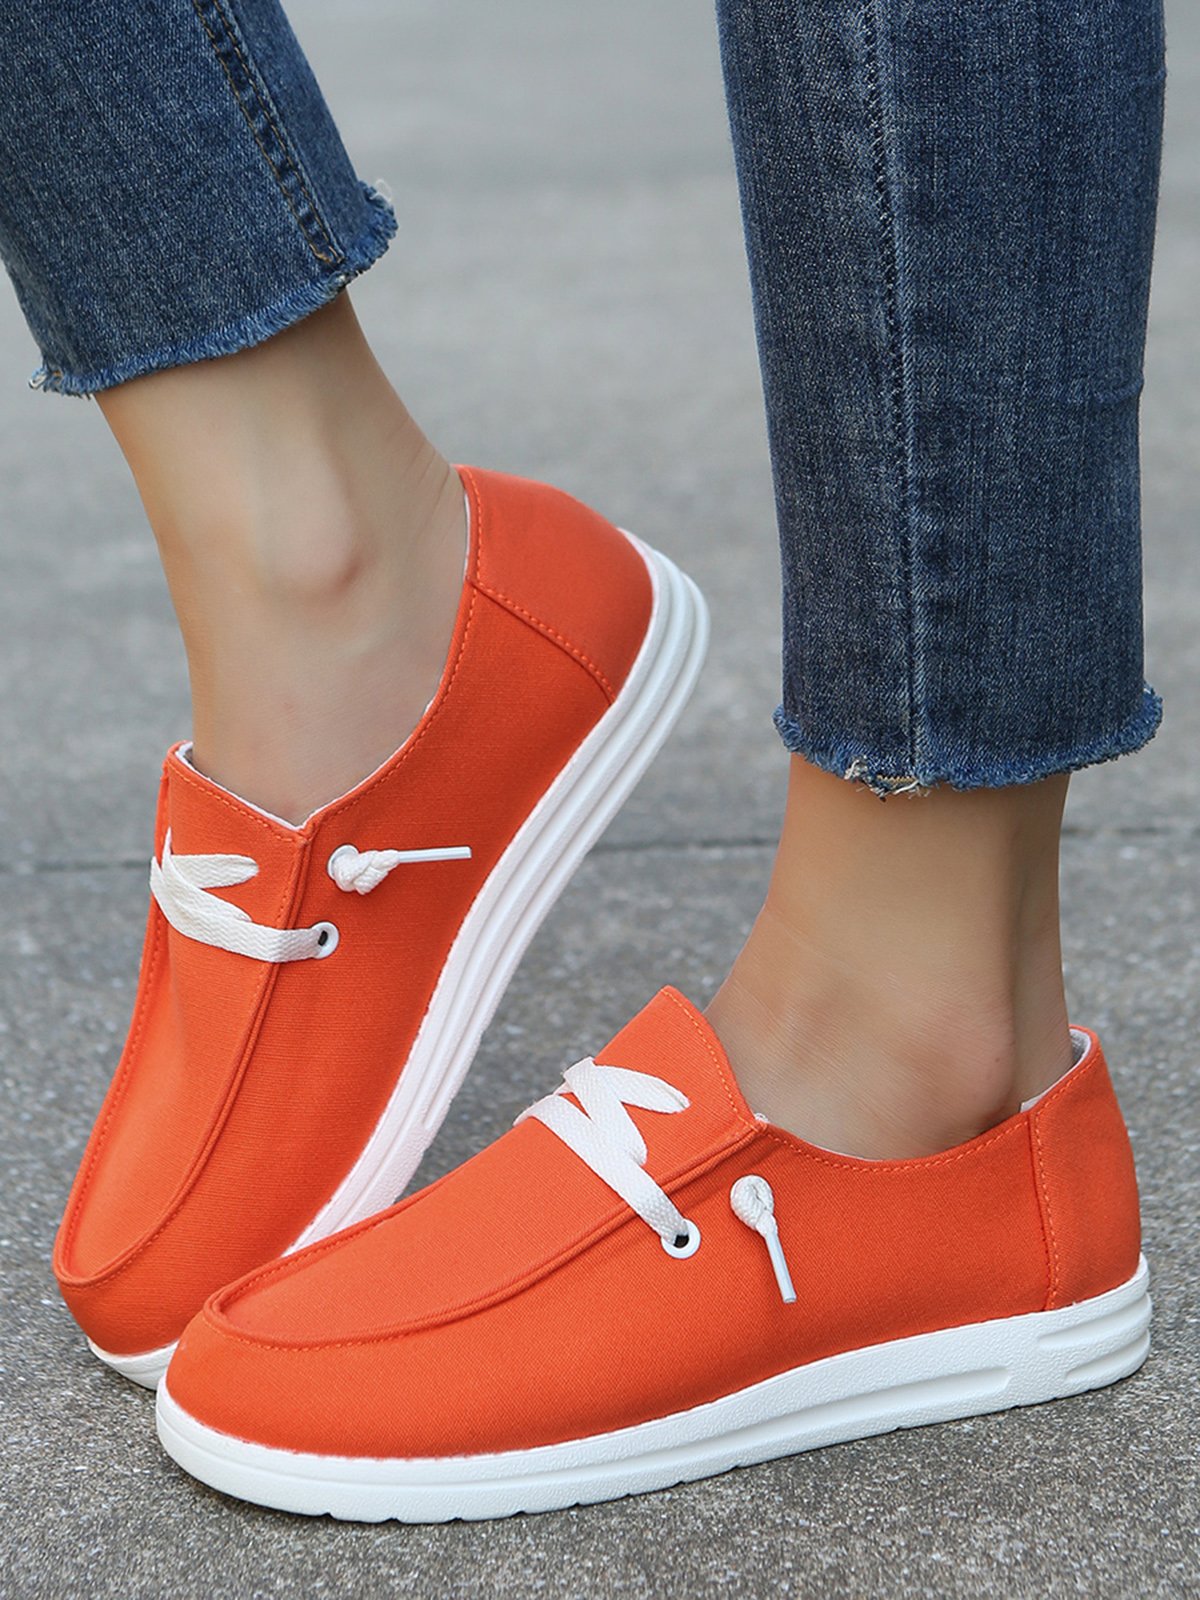 Orange Simple Lace Up Casual Flats